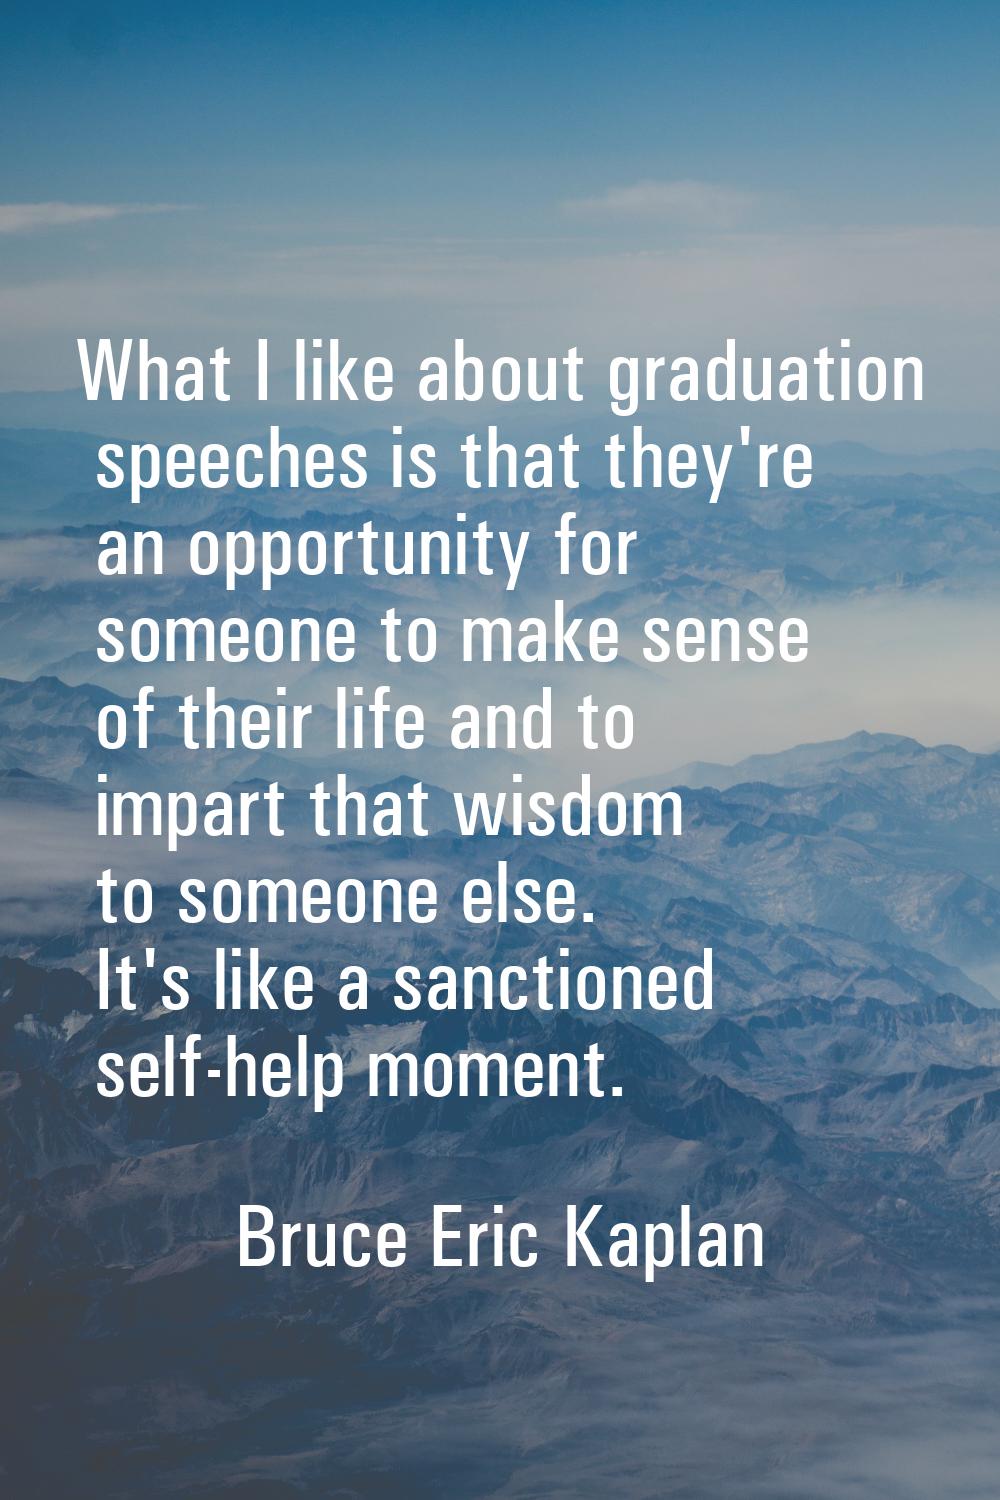 What I like about graduation speeches is that they're an opportunity for someone to make sense of t